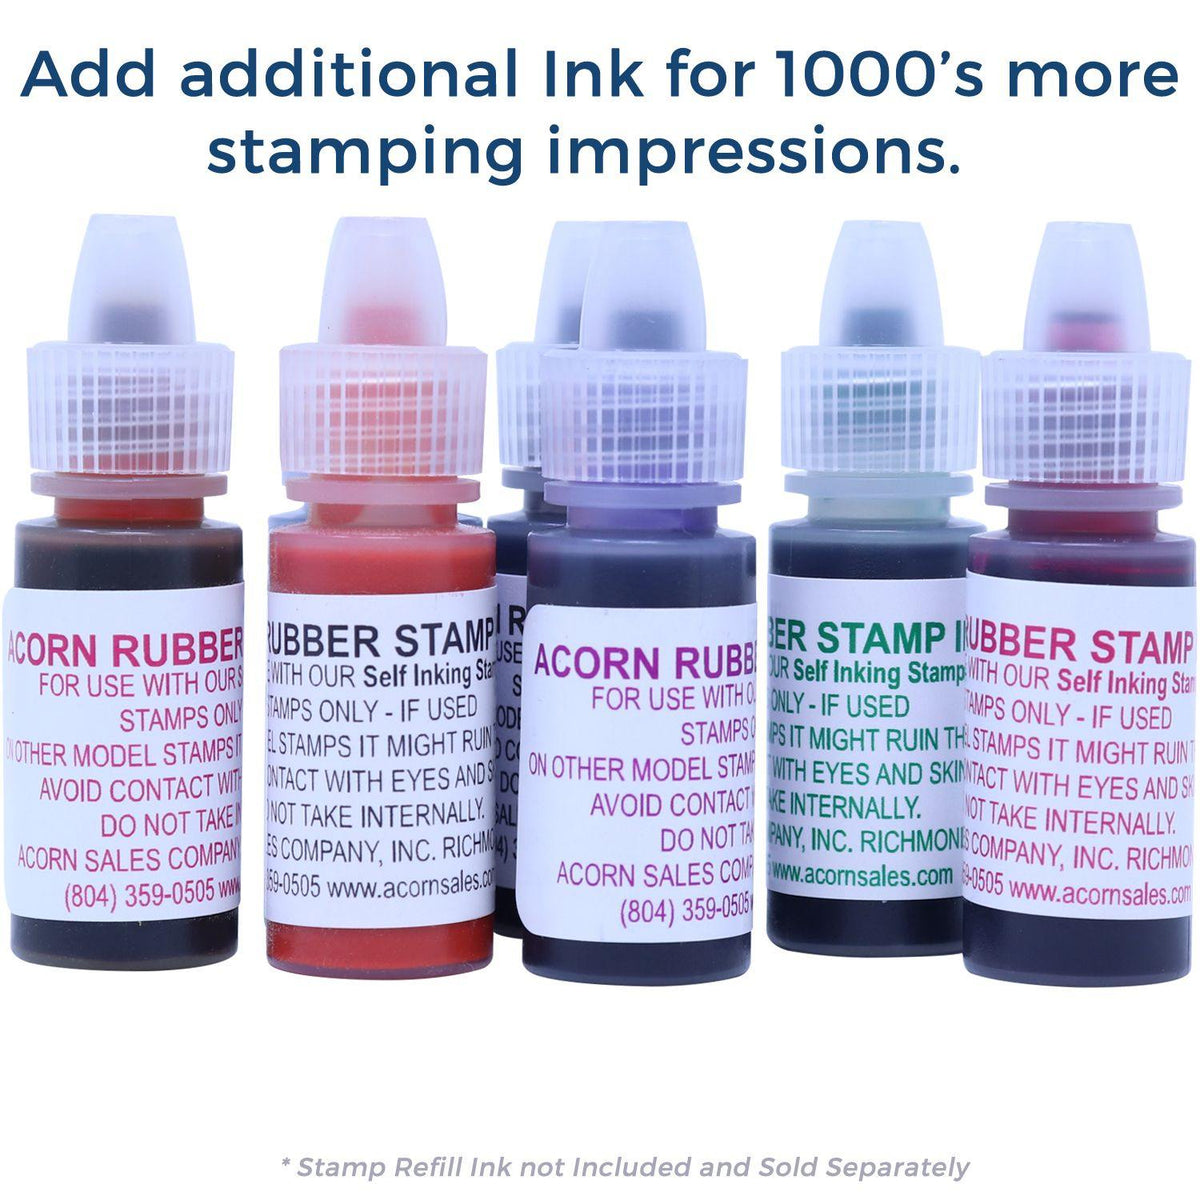 Refill Inks for Large Pre-Inked Lets review this with Lamp Stamp Available